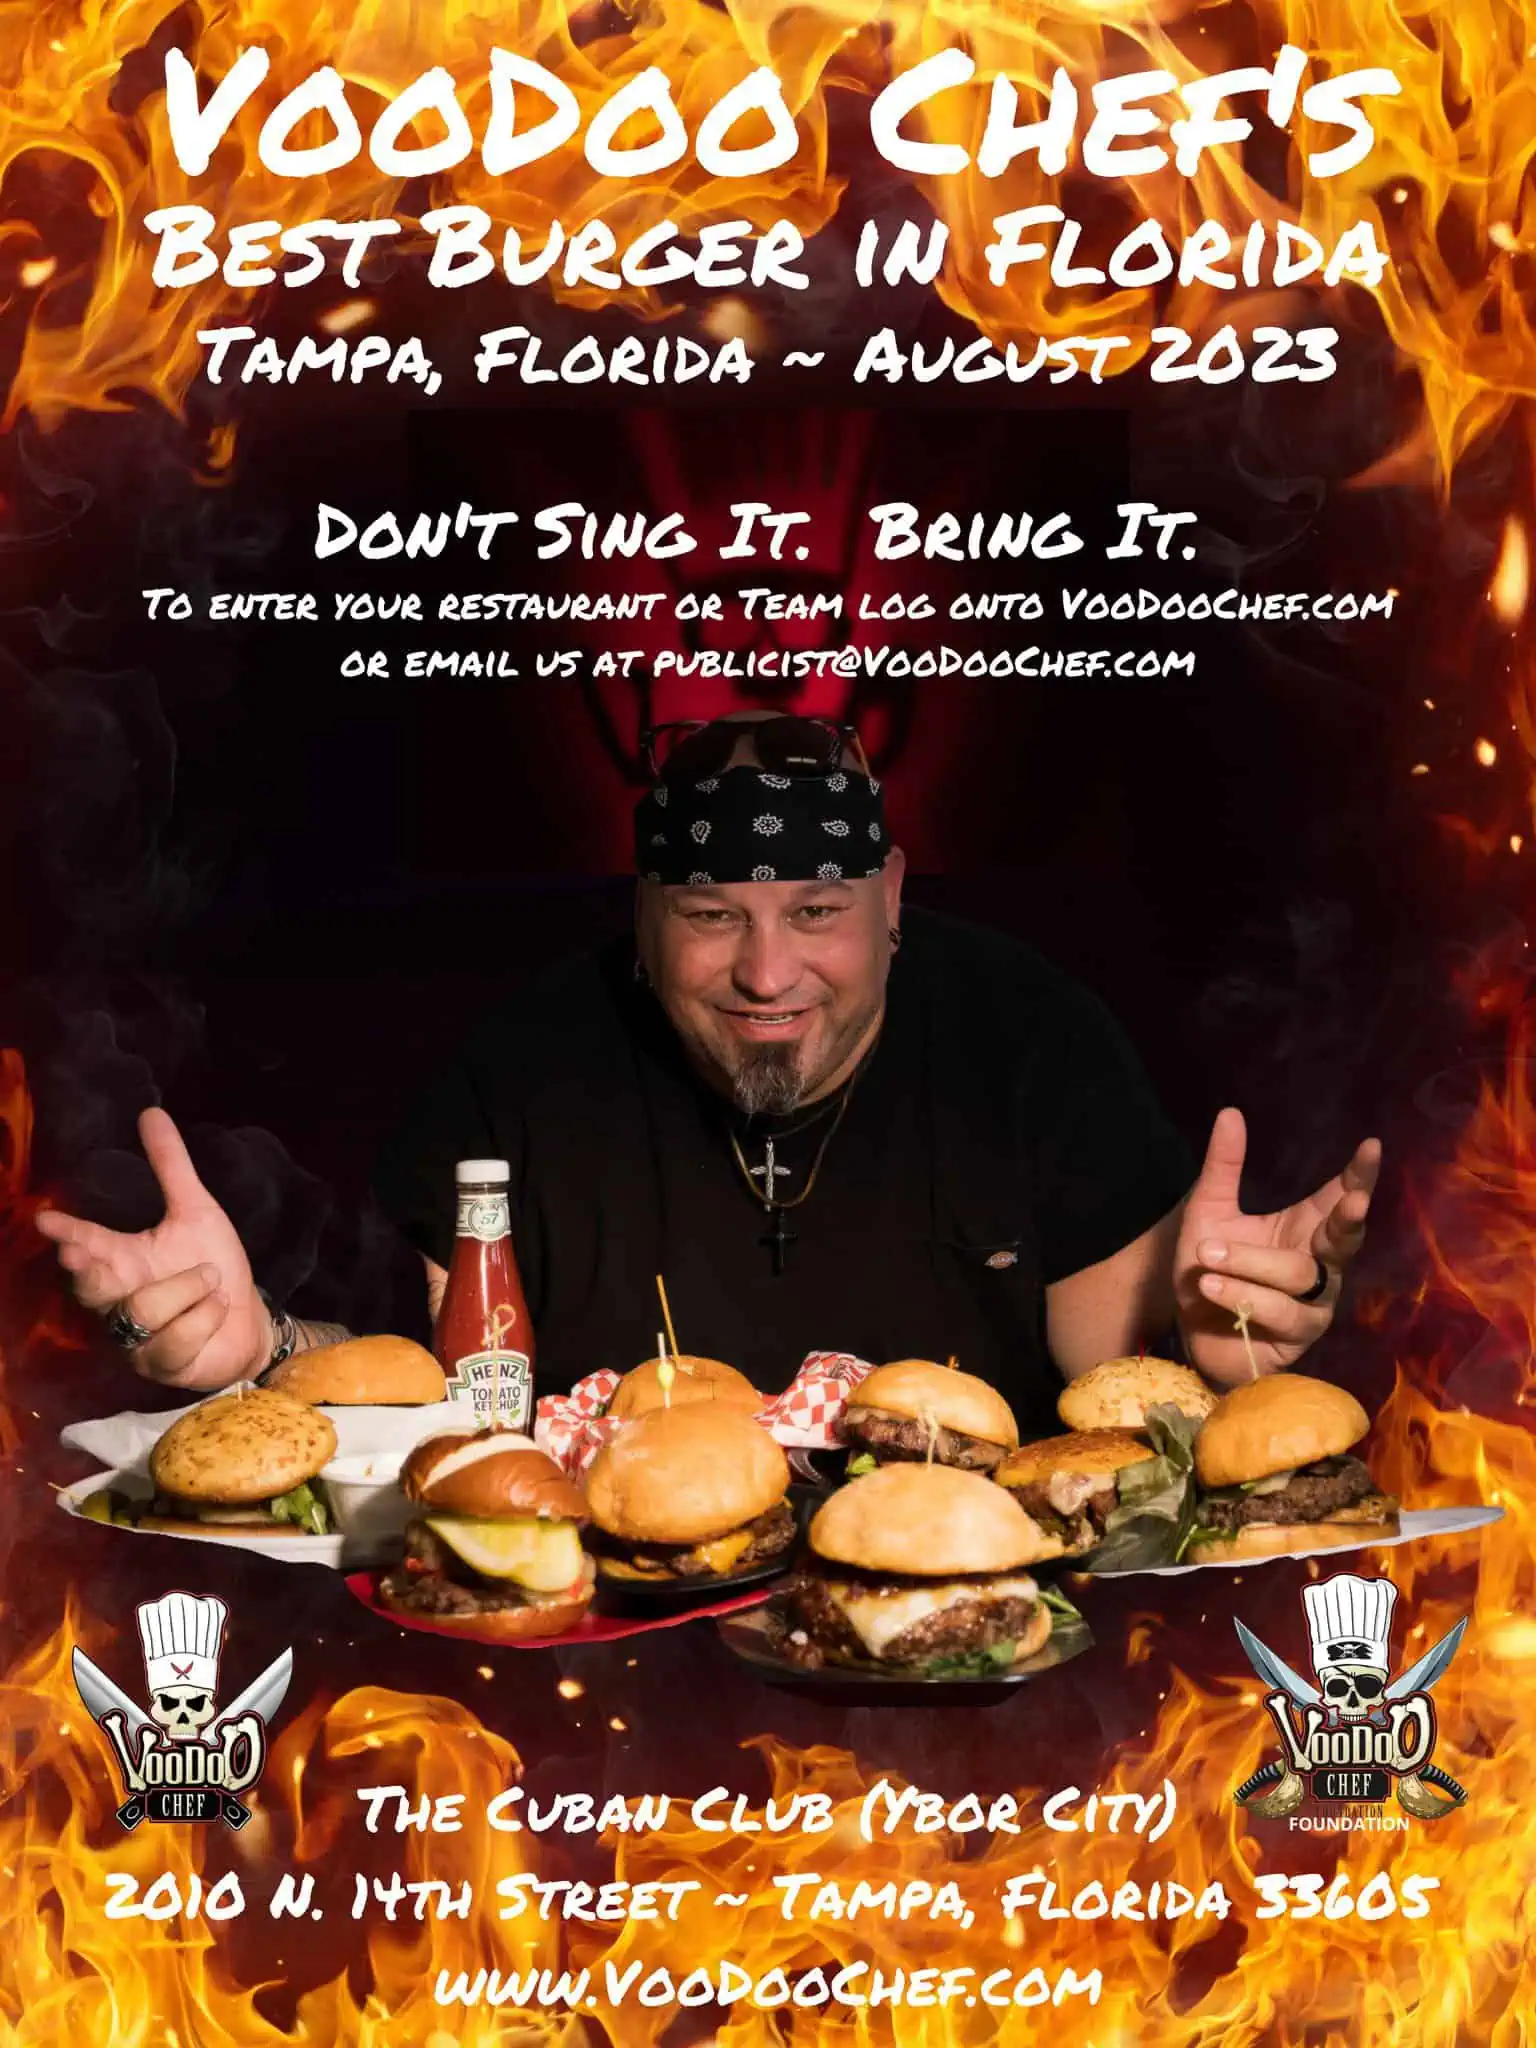 Help choose a champion for best burger in florida this weekend at the cuban club from 4pm-10pm